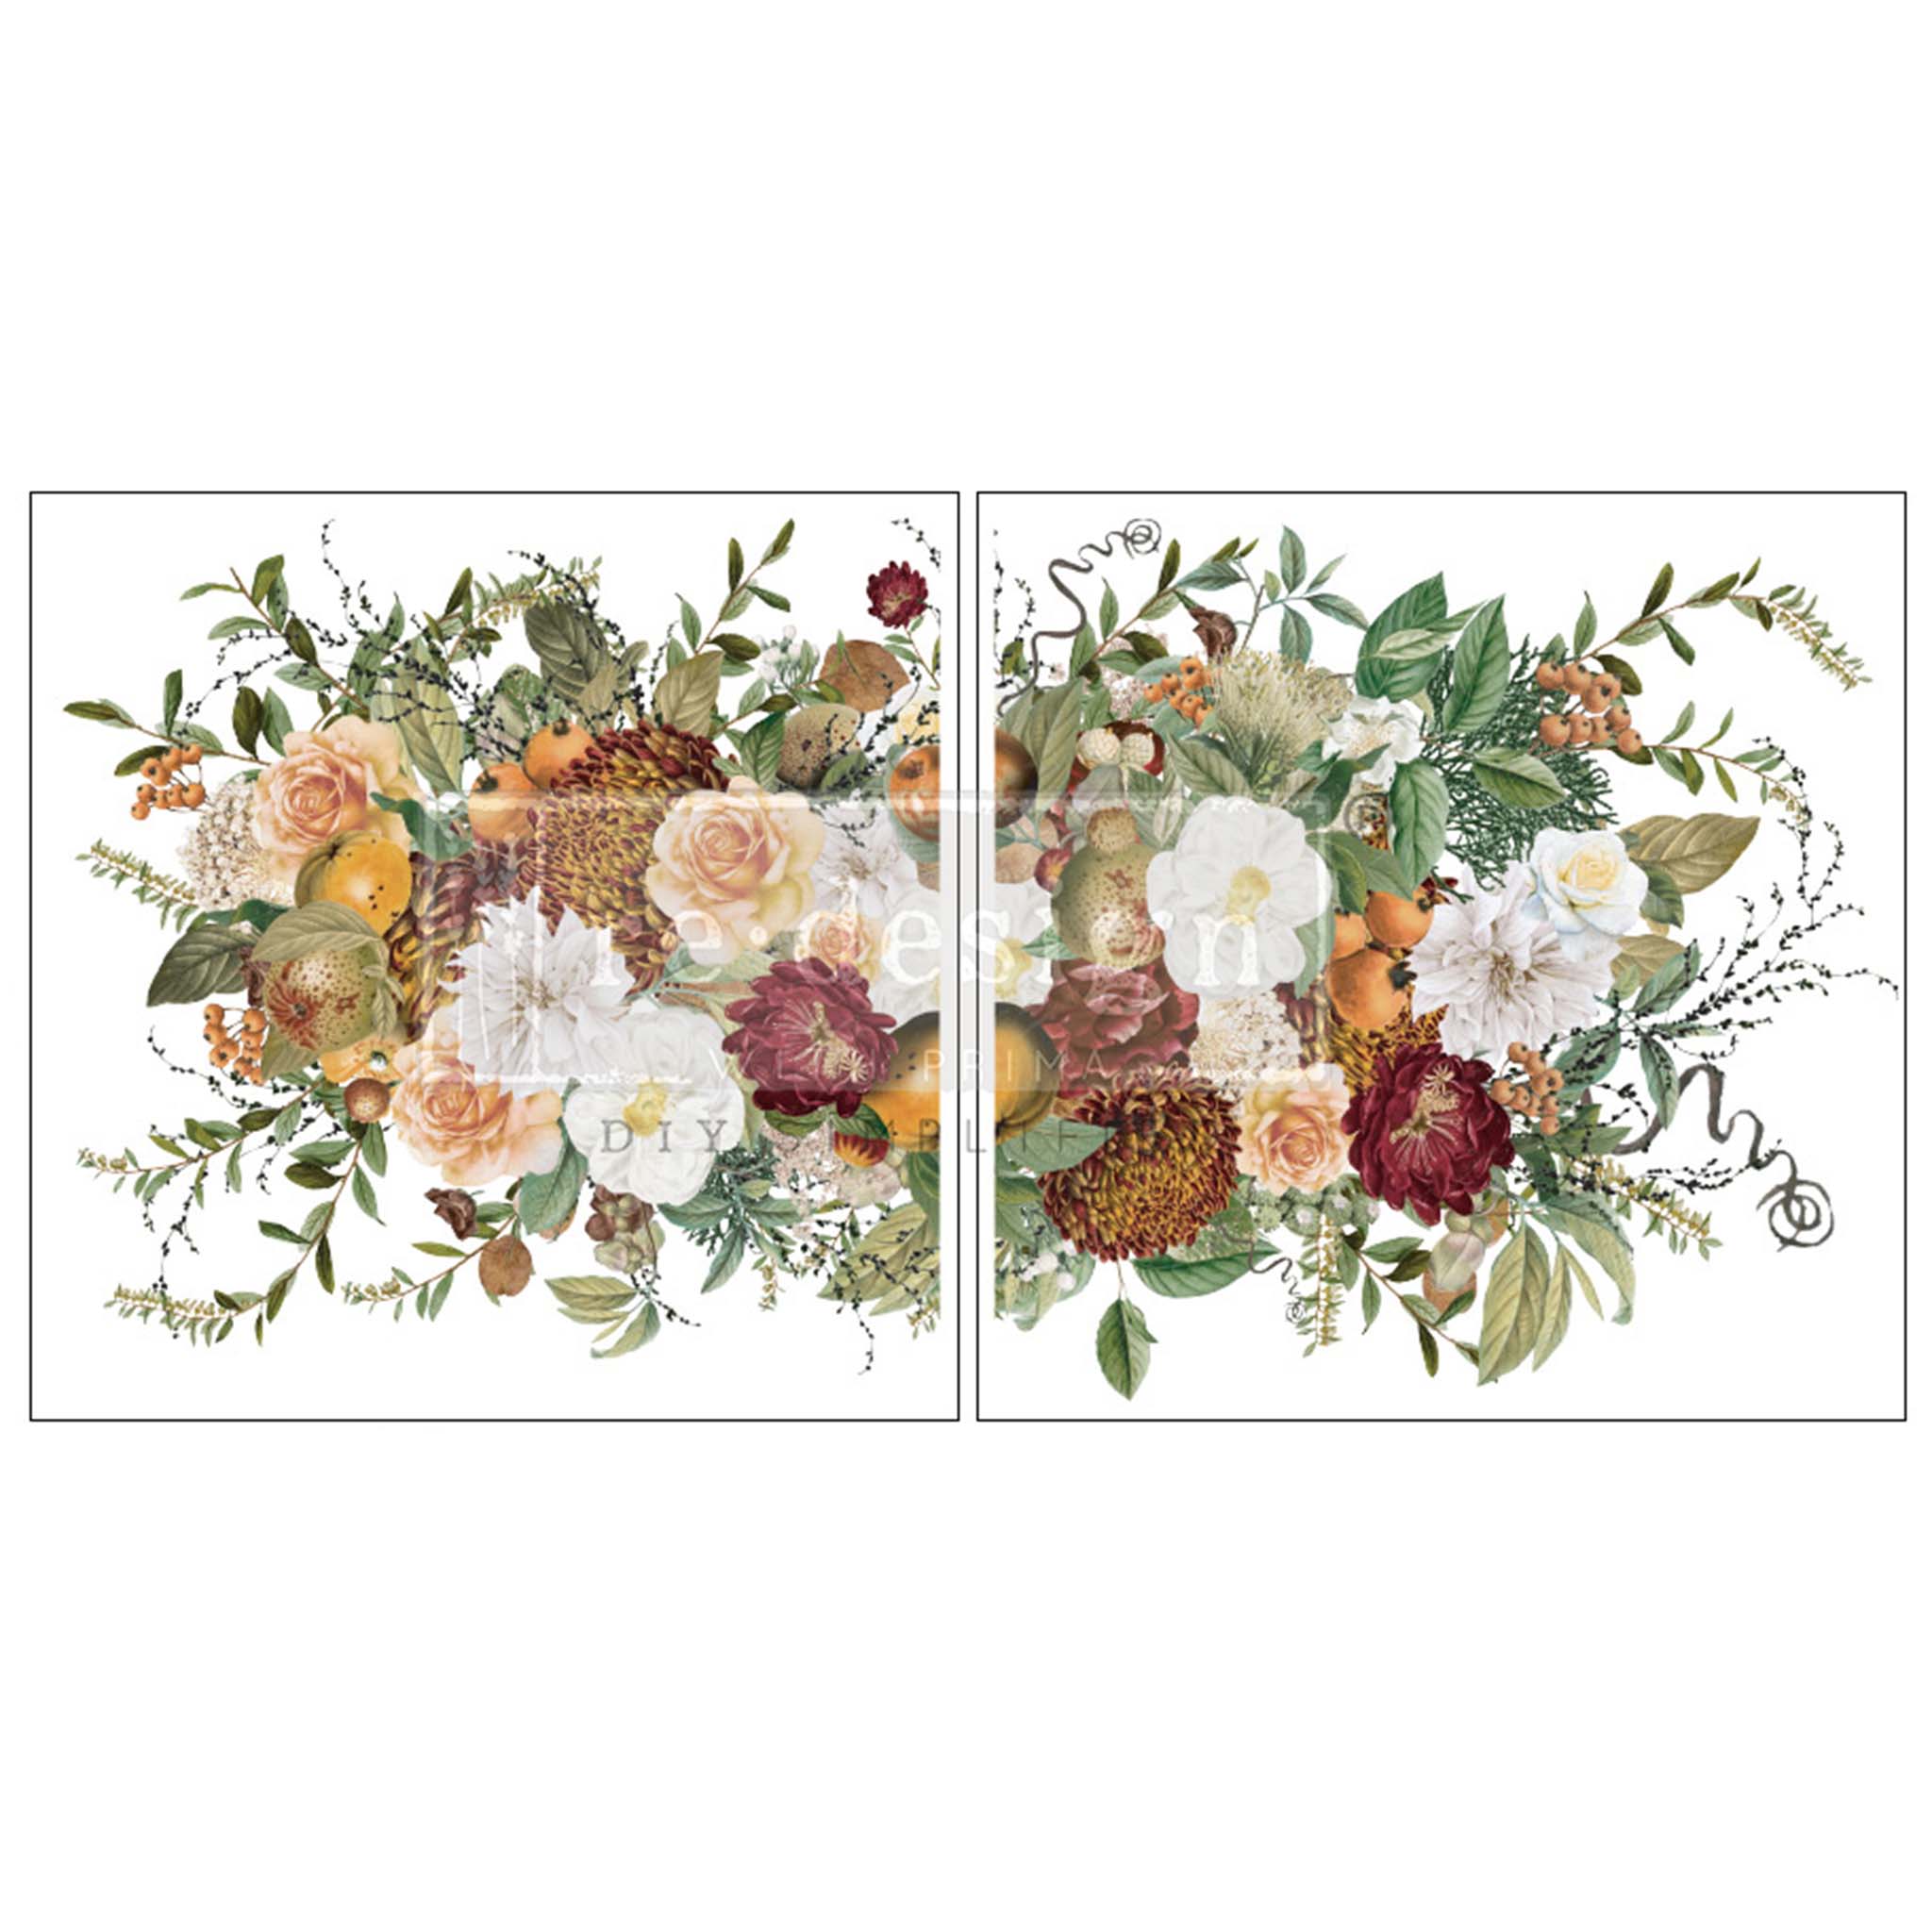 Two sheets of a rub-on transfer that features a split design of a large bouquets of cream, peach, orange and burgundy flowers surrounded by lush greenery.